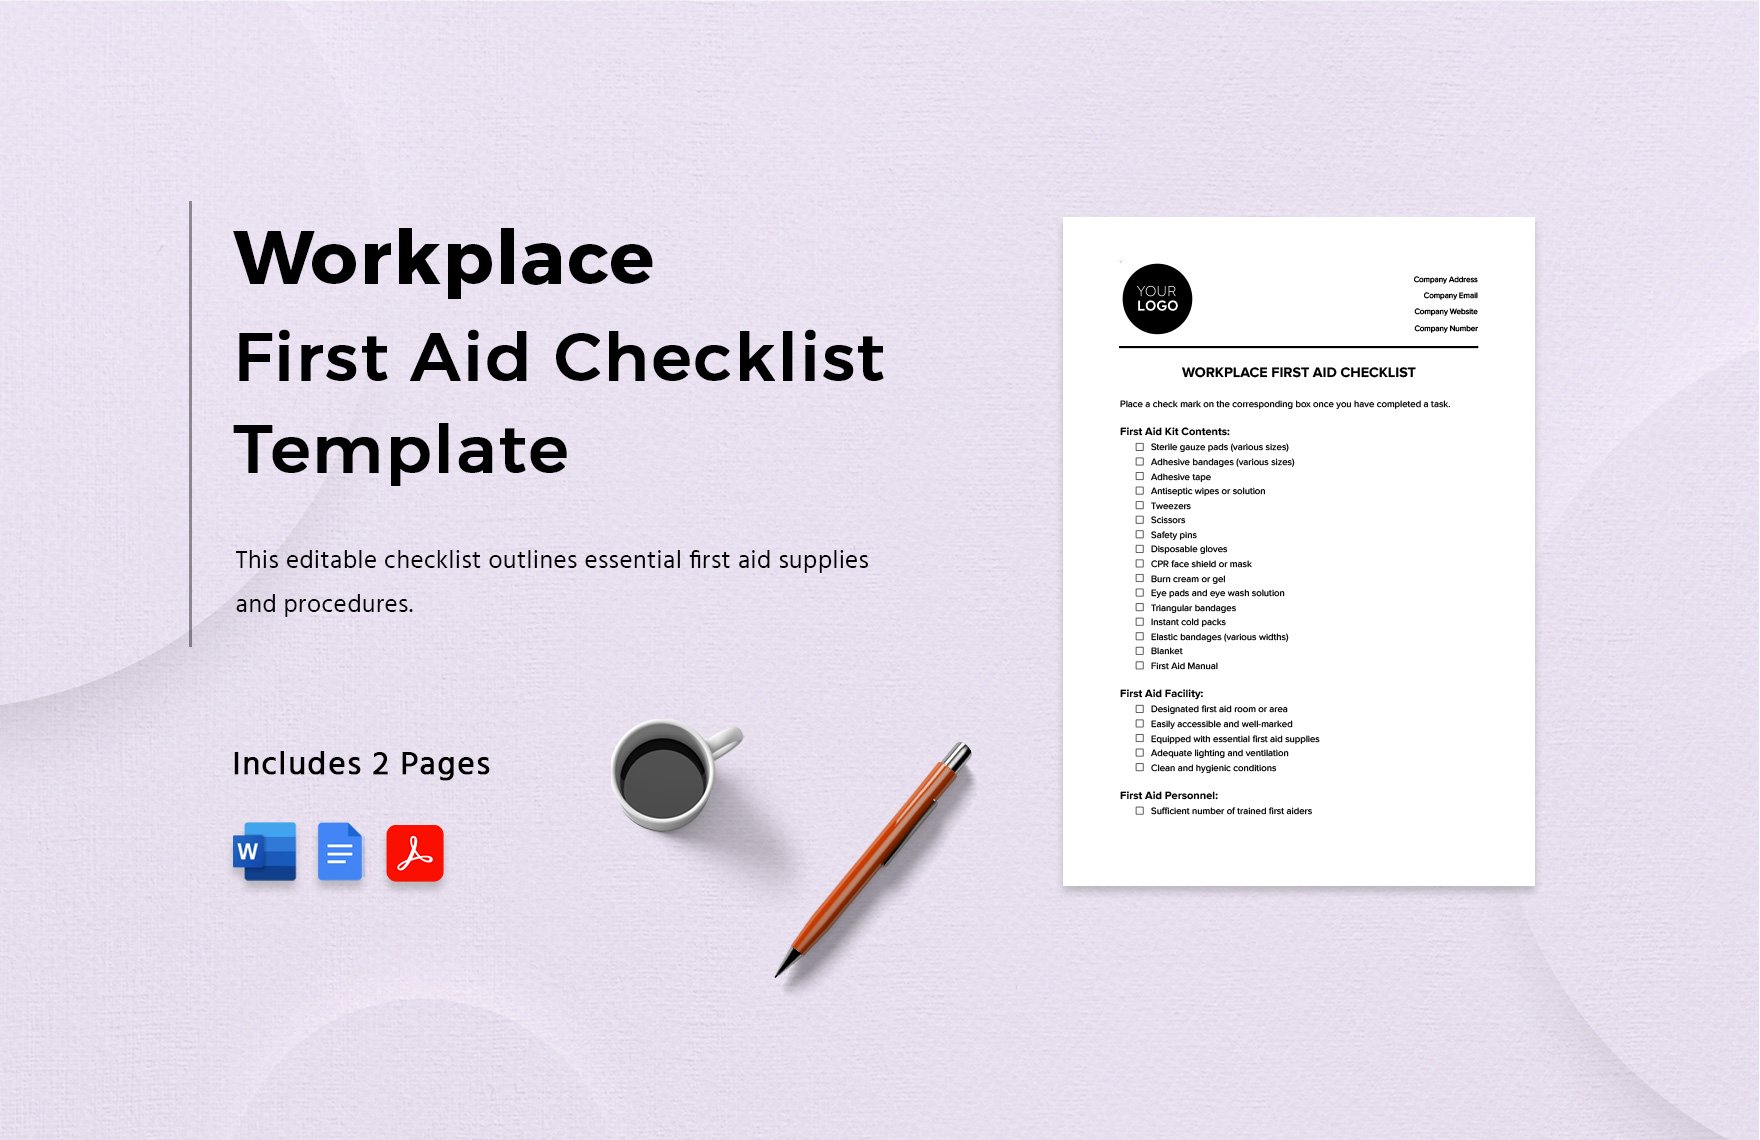 Workplace First Aid Checklist Template in Word, Google Docs, PDF